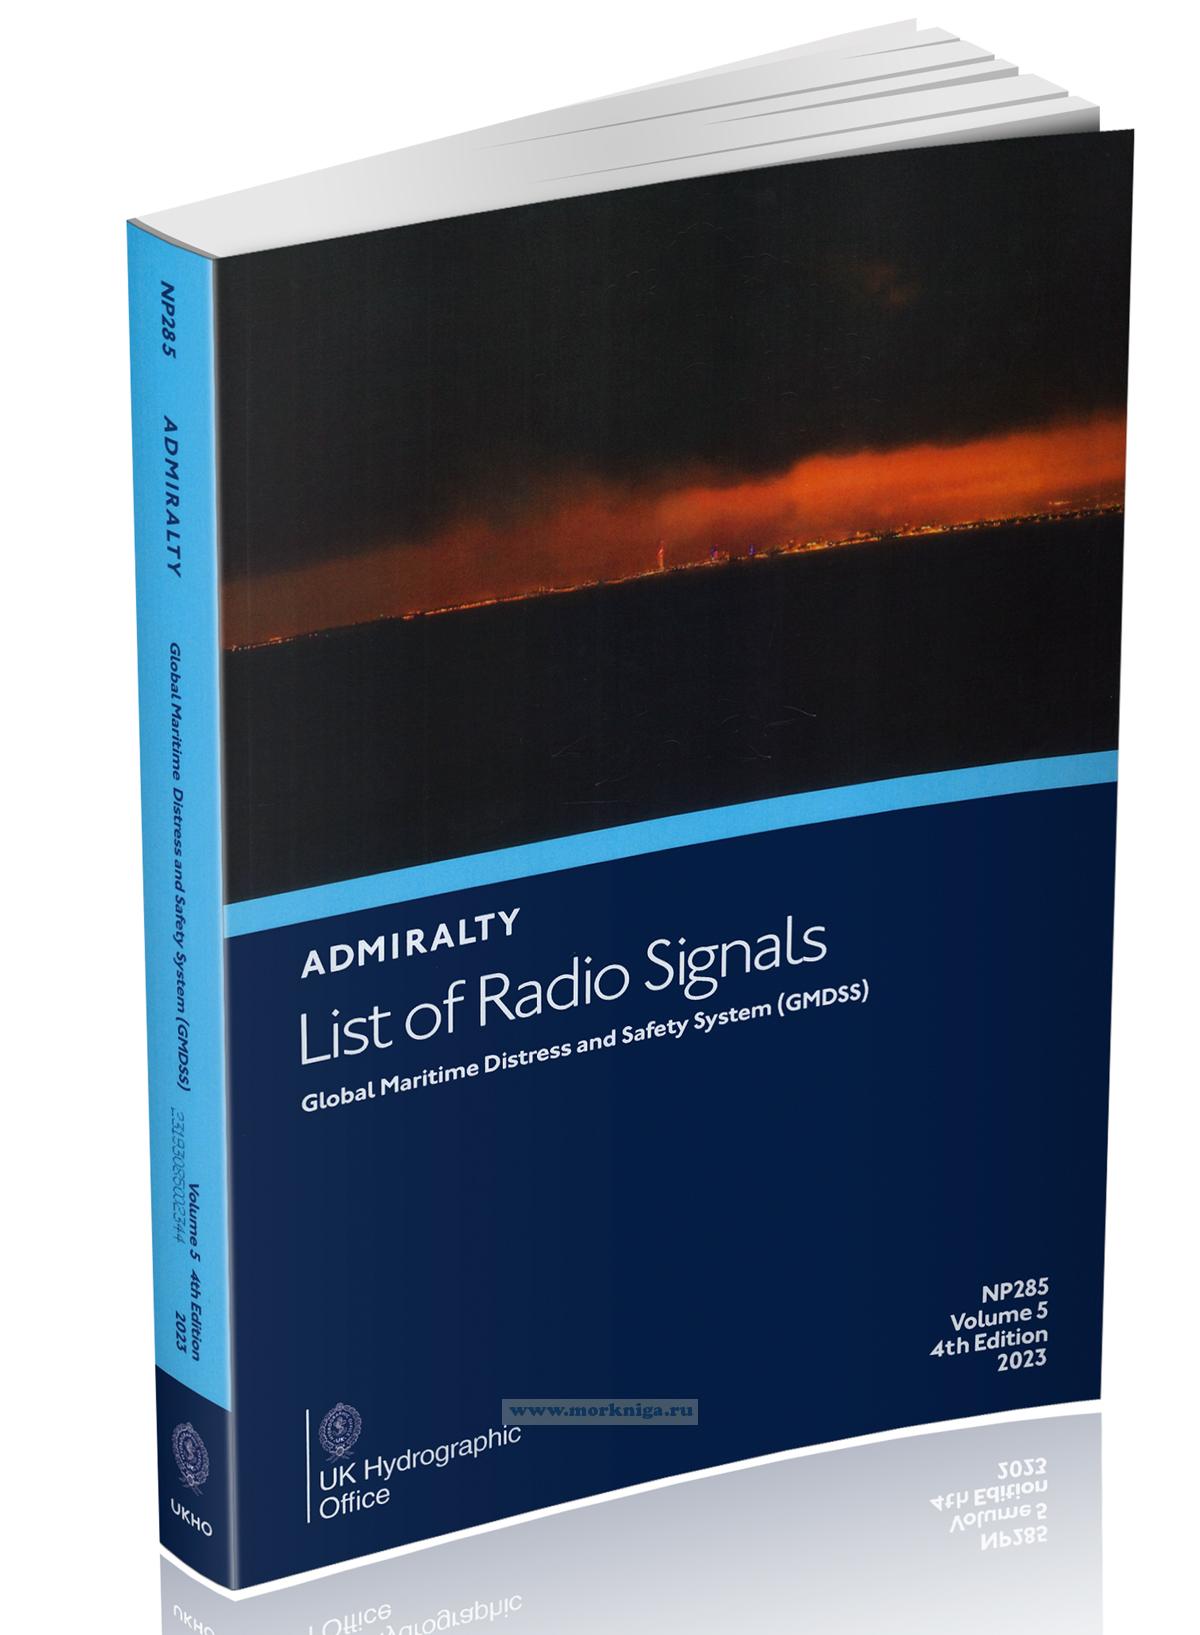 Admiralty list of radio signals. Vol 5 NP285 (ALRS). Global maritime distress and safety system (GMDSS). 2023